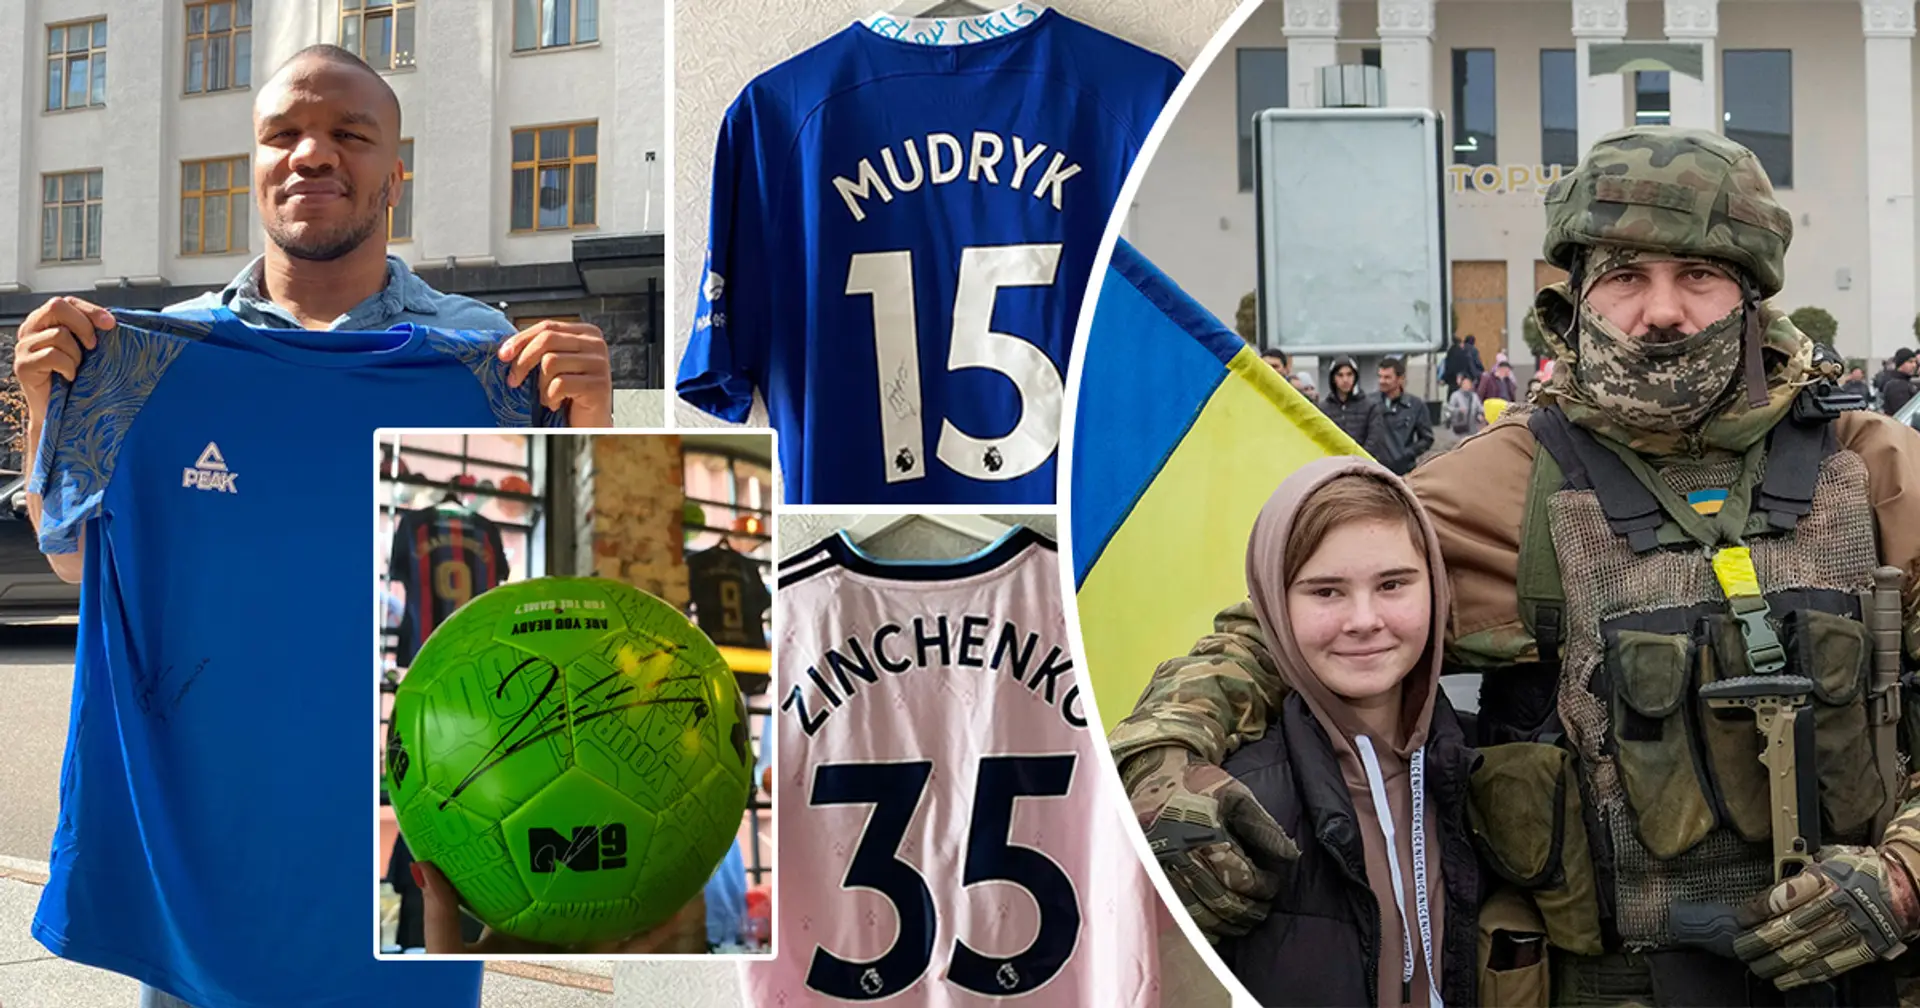 Lewandowski's signed ball, Mudryk's autographed shirt & more: Tribuna.com launches fundraising campaign including auction with top athletes’ valuable items to support Ukrainian army 